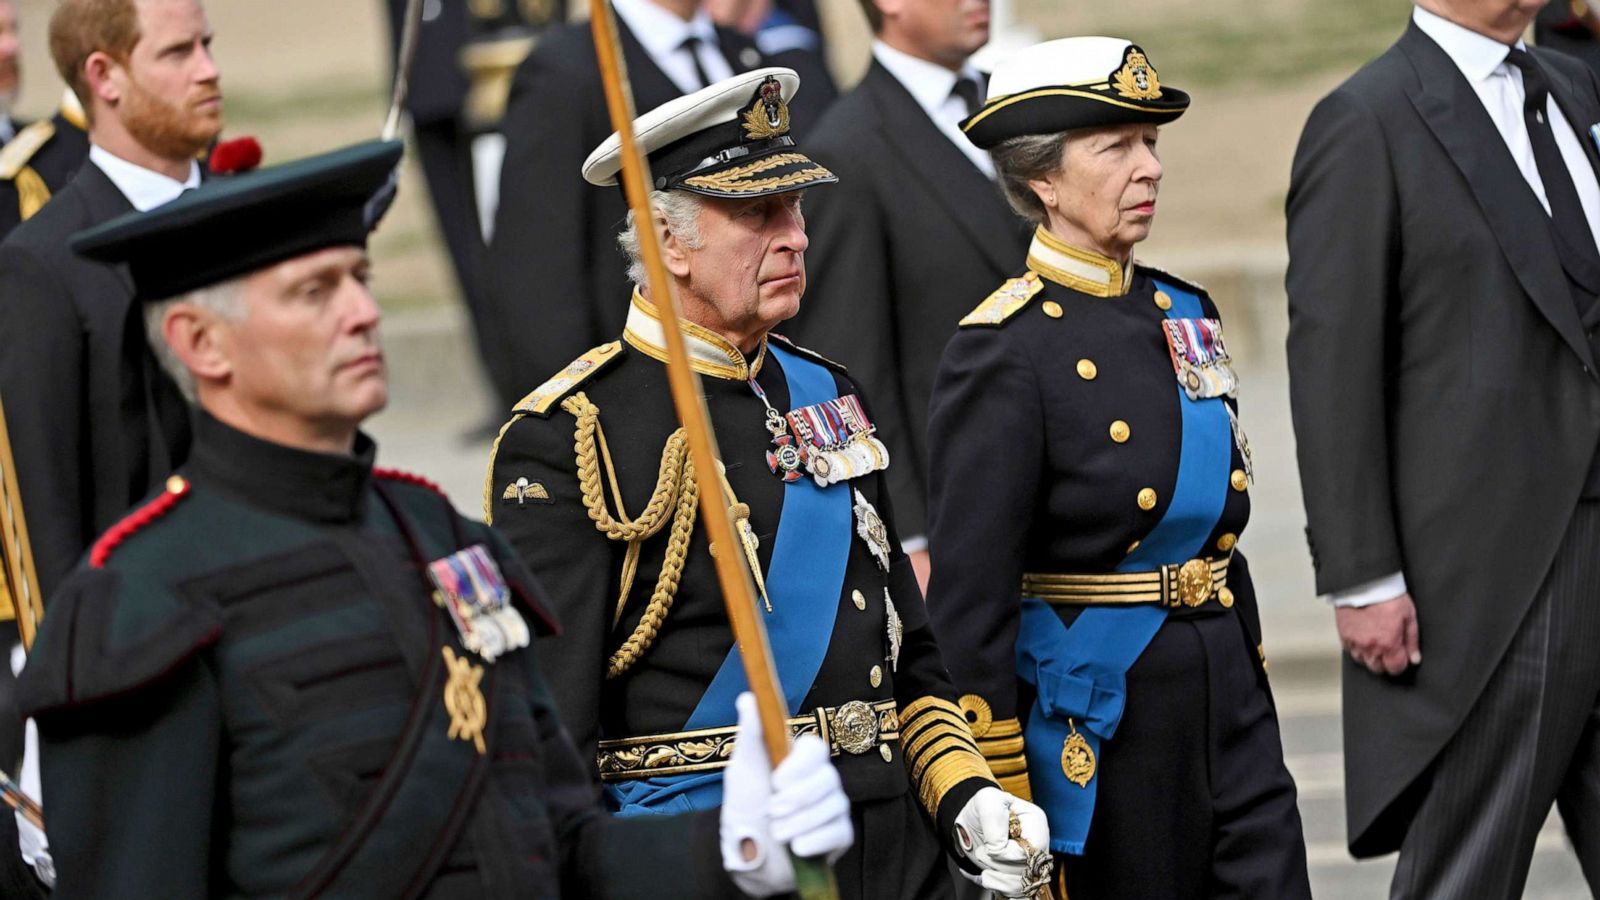 Princess Anne thanks Household Cavalrymen for their role in Queen's funeral